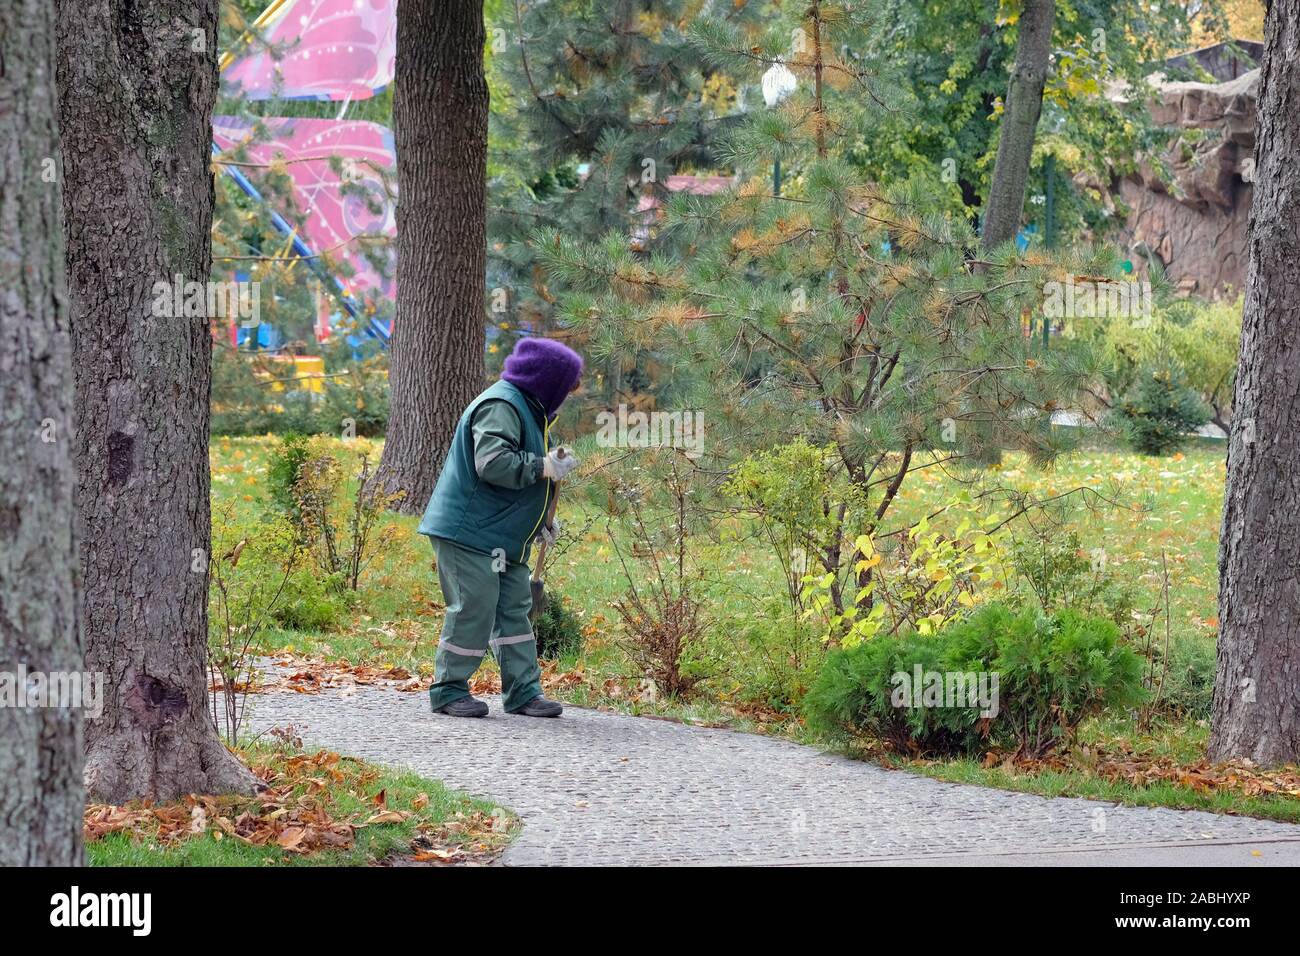 A park worker in a green suit and purple hood sweeps leaves with a broom. City park in the autumn. Woman cleaning a park alley from debris and leaves. Stock Photo